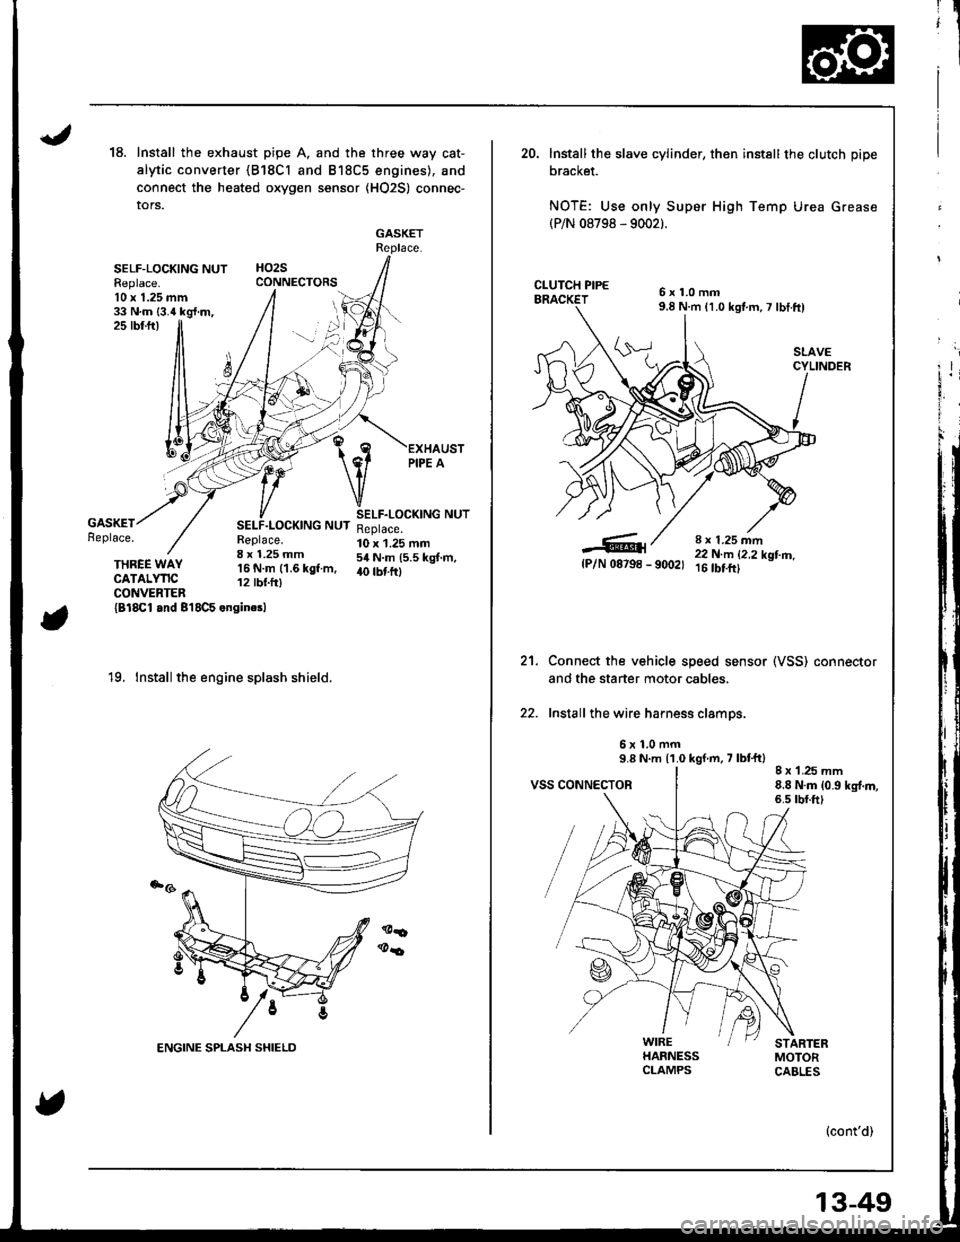 HONDA INTEGRA 1998 4.G Workshop Manual 18.Install the exhaust pipe A. and the three way cat-
alytic converter {B18Cl and B18C5 engines), and
connect the heated oxygen sensor {HO2S) connec-
tors.
GASKETReplace.
HO2SCONNECTORSSELF-LOCKING NU